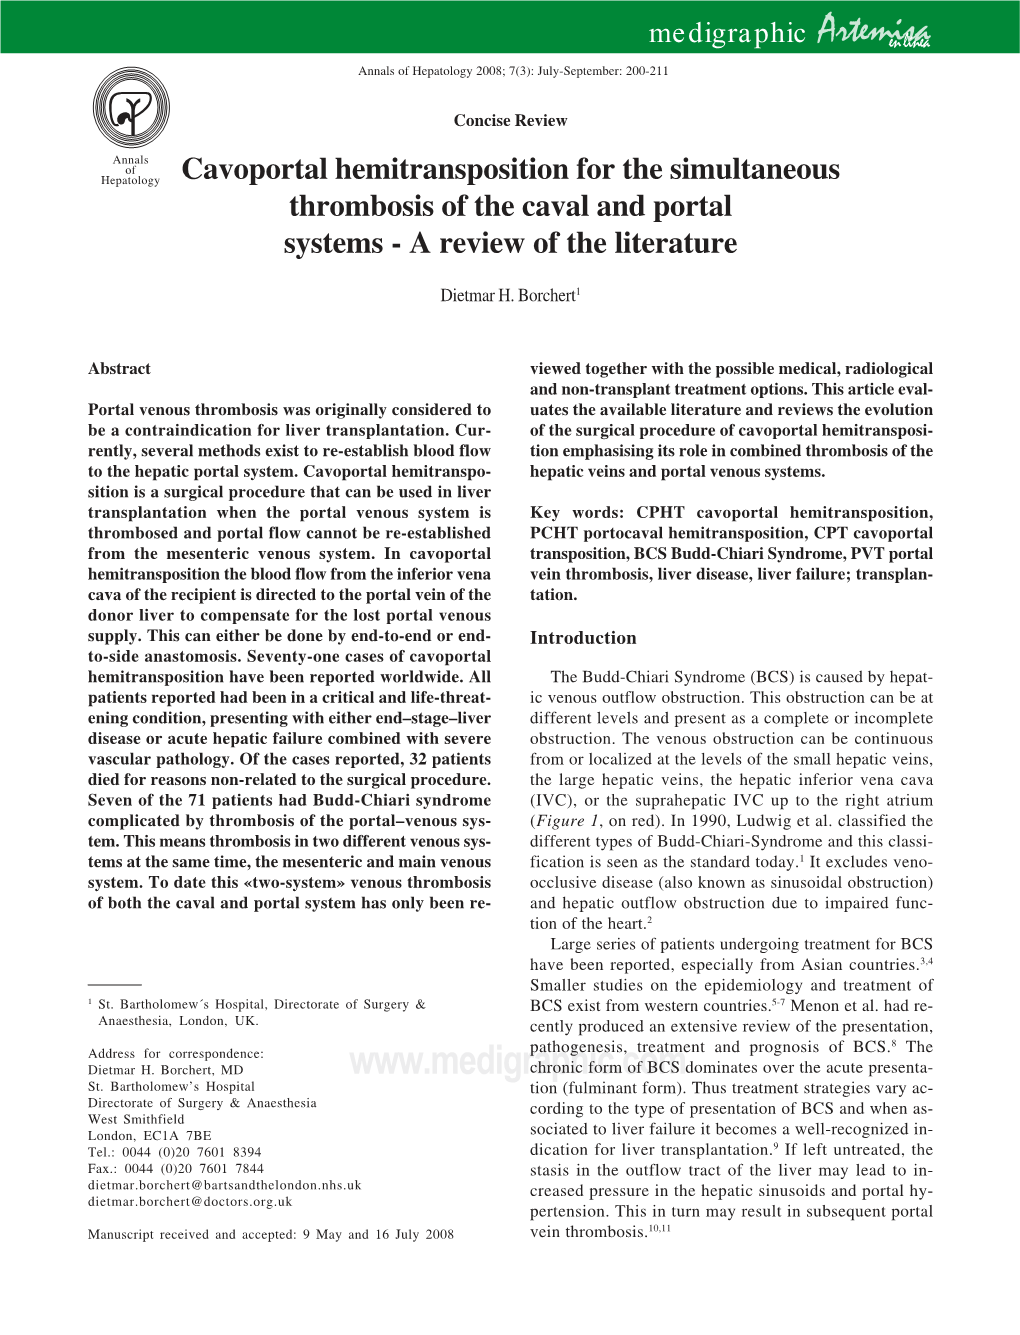 Cavoportal Hemitransposition for the Simultaneous Thrombosis of the Caval and Portal Systems - a Review of the Literature